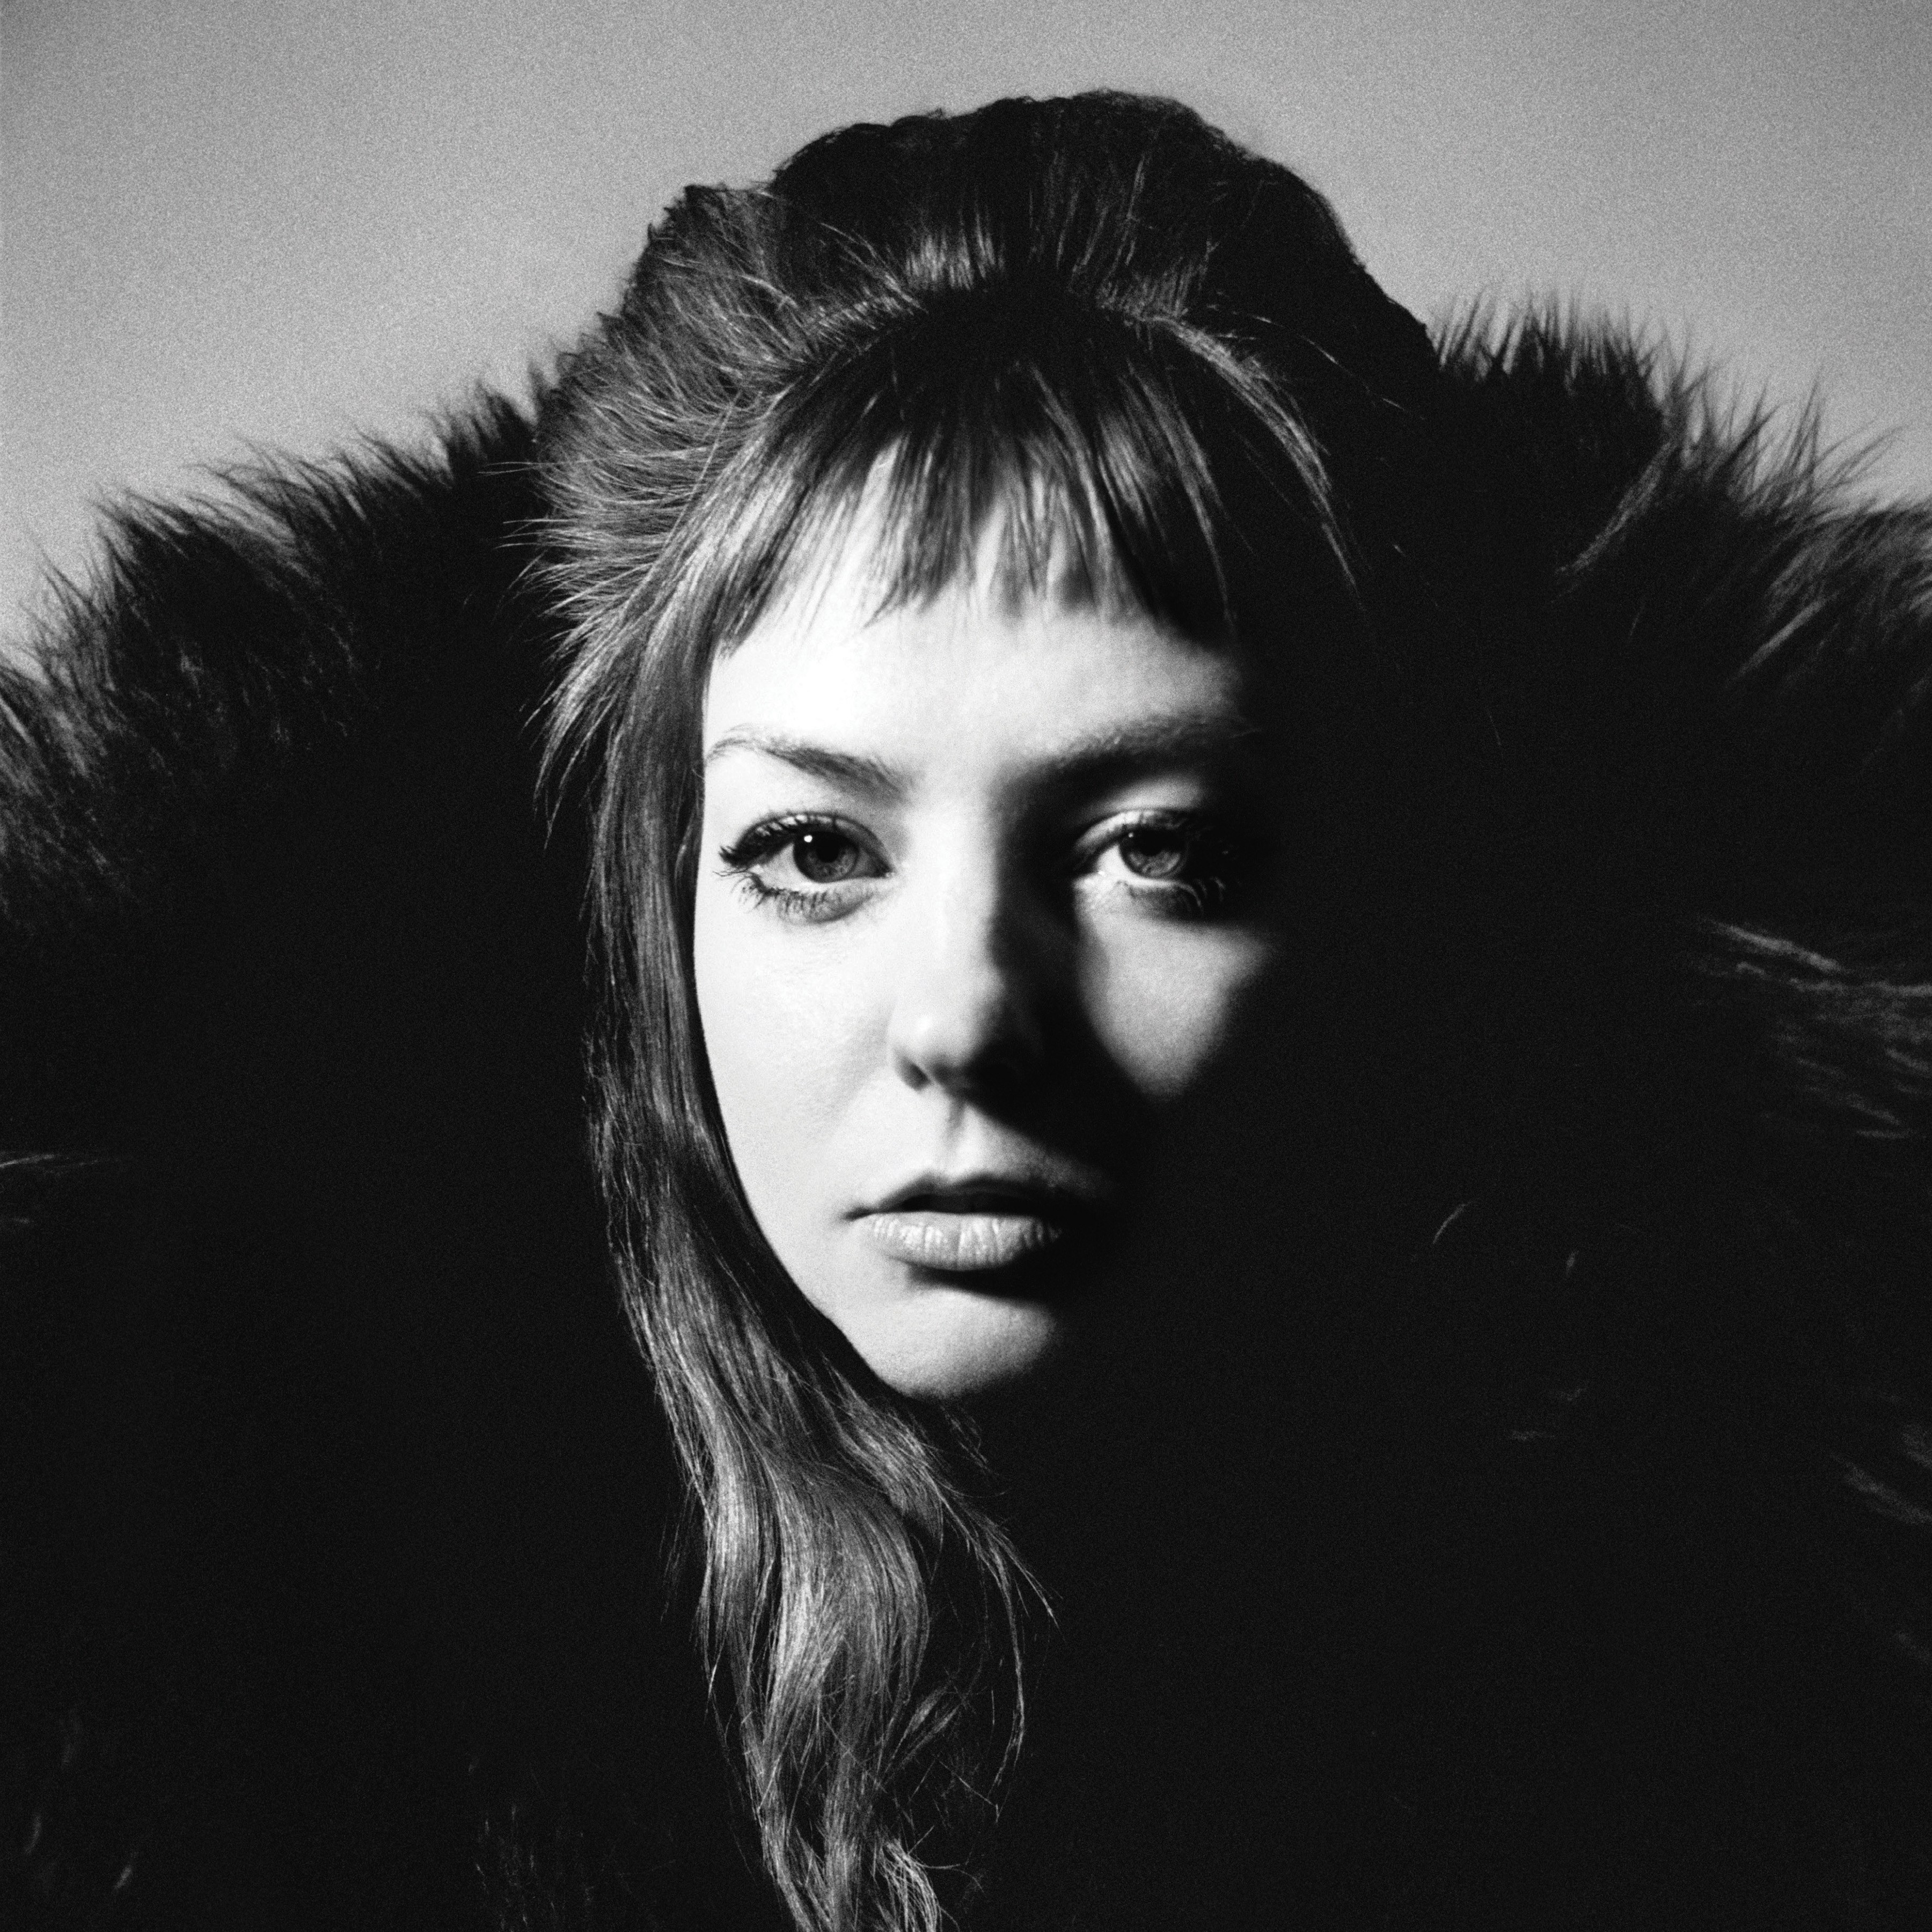 Angel Olsen Announces New Album <i></noscript>All Mirrors</i>, Releases Video for Title Track” title=”All Mirrors” data-original-id=”336787″ data-adjusted-id=”336787″ class=”sm_size_full_width sm_alignment_center ” data-image-use=”multiple_use” />
</div>
</div>
</div>
</div>
</div>
</section>
<section data-particle_enable=